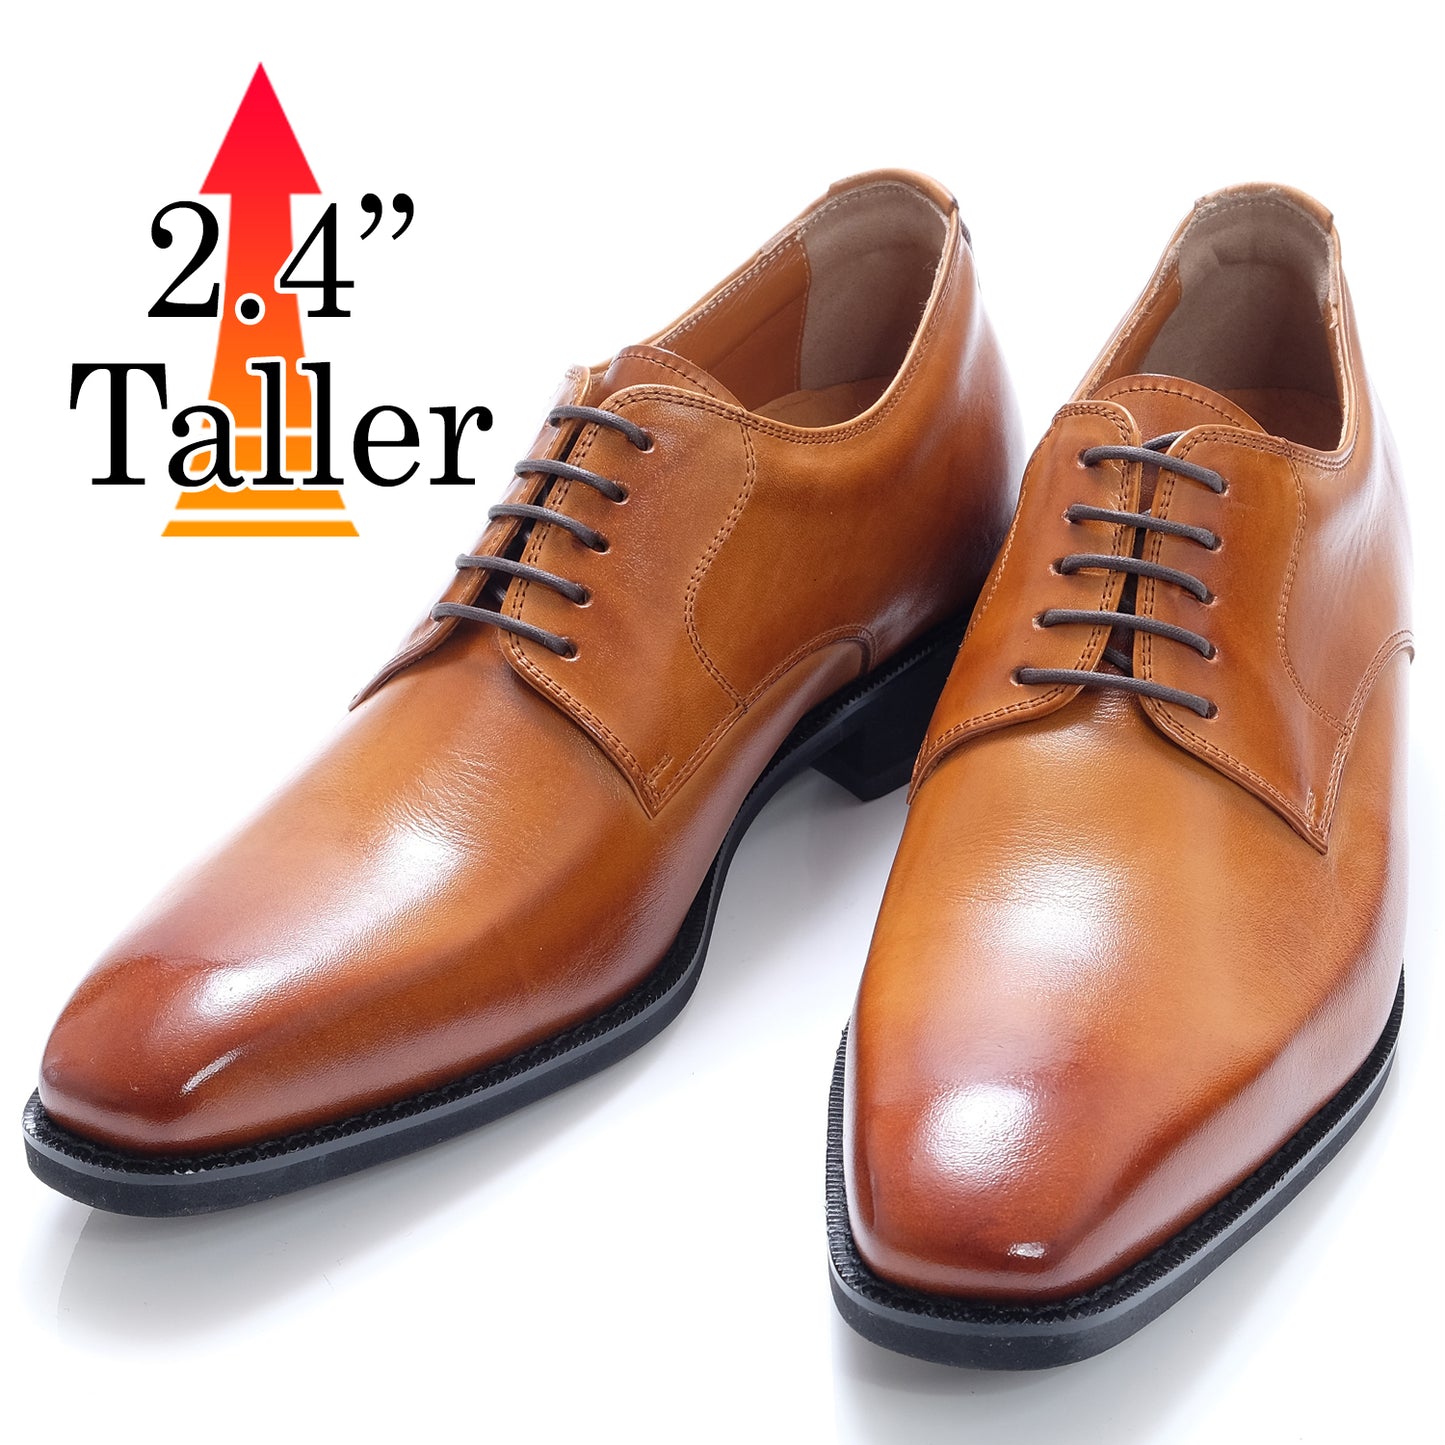 Men's Elevator Shoes Height Increasing 2.36" Taller Derby Plain Toe Lace Up Dress Shoes Genuine Leather No. 1931